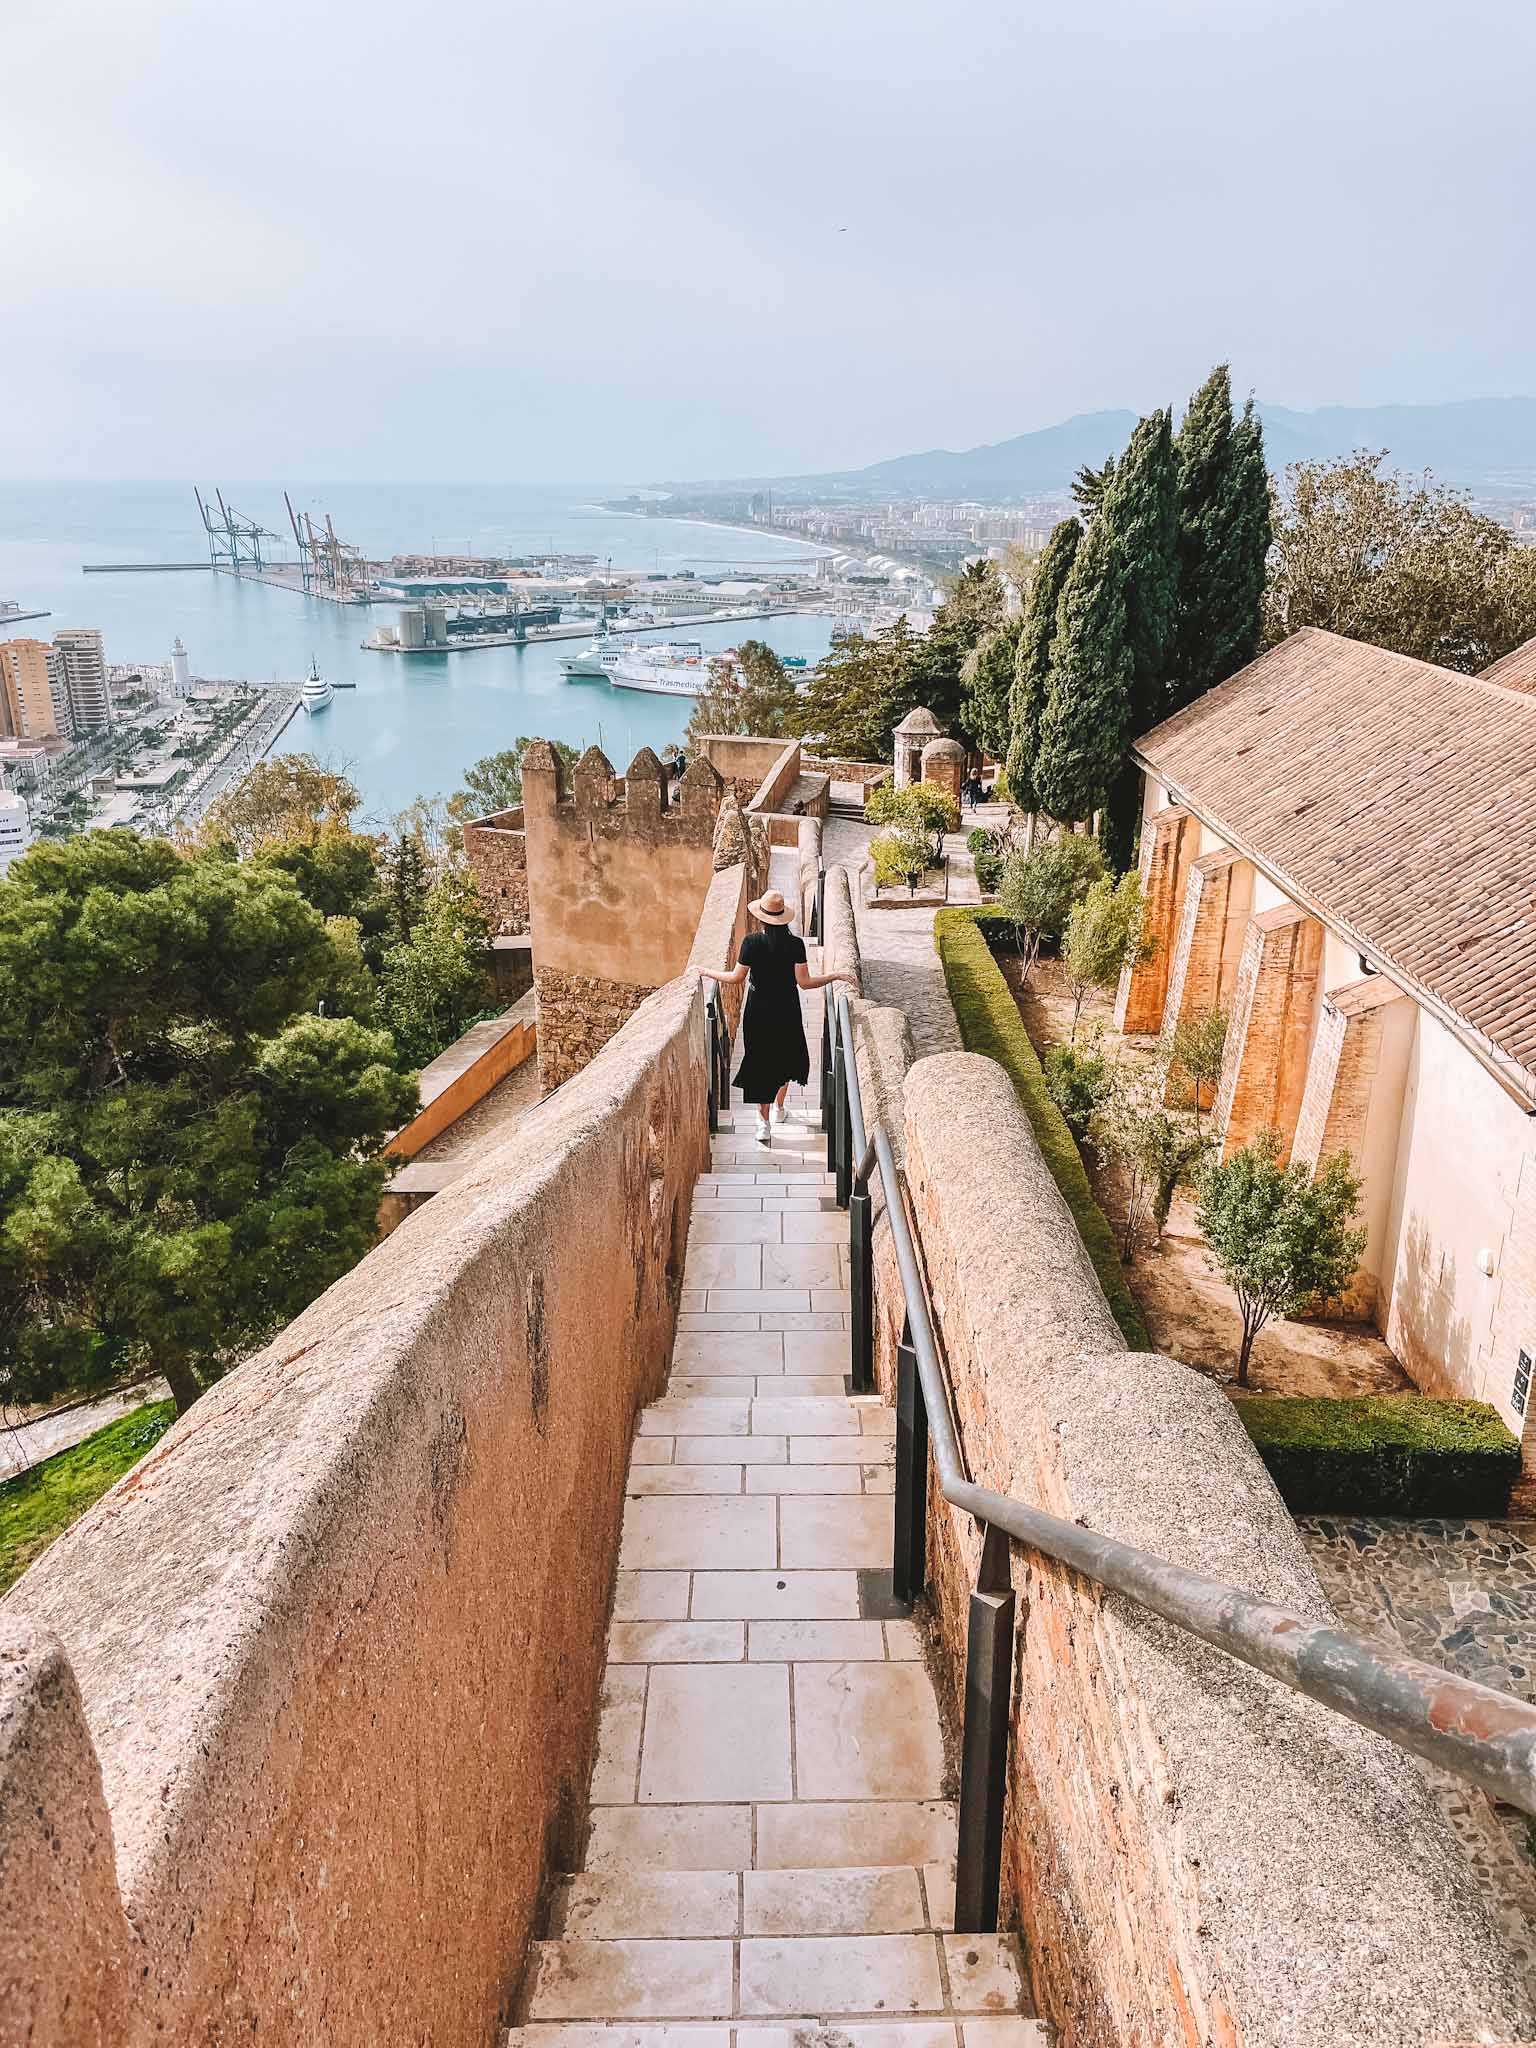 Best rooftops and cool places to see Malaga from above